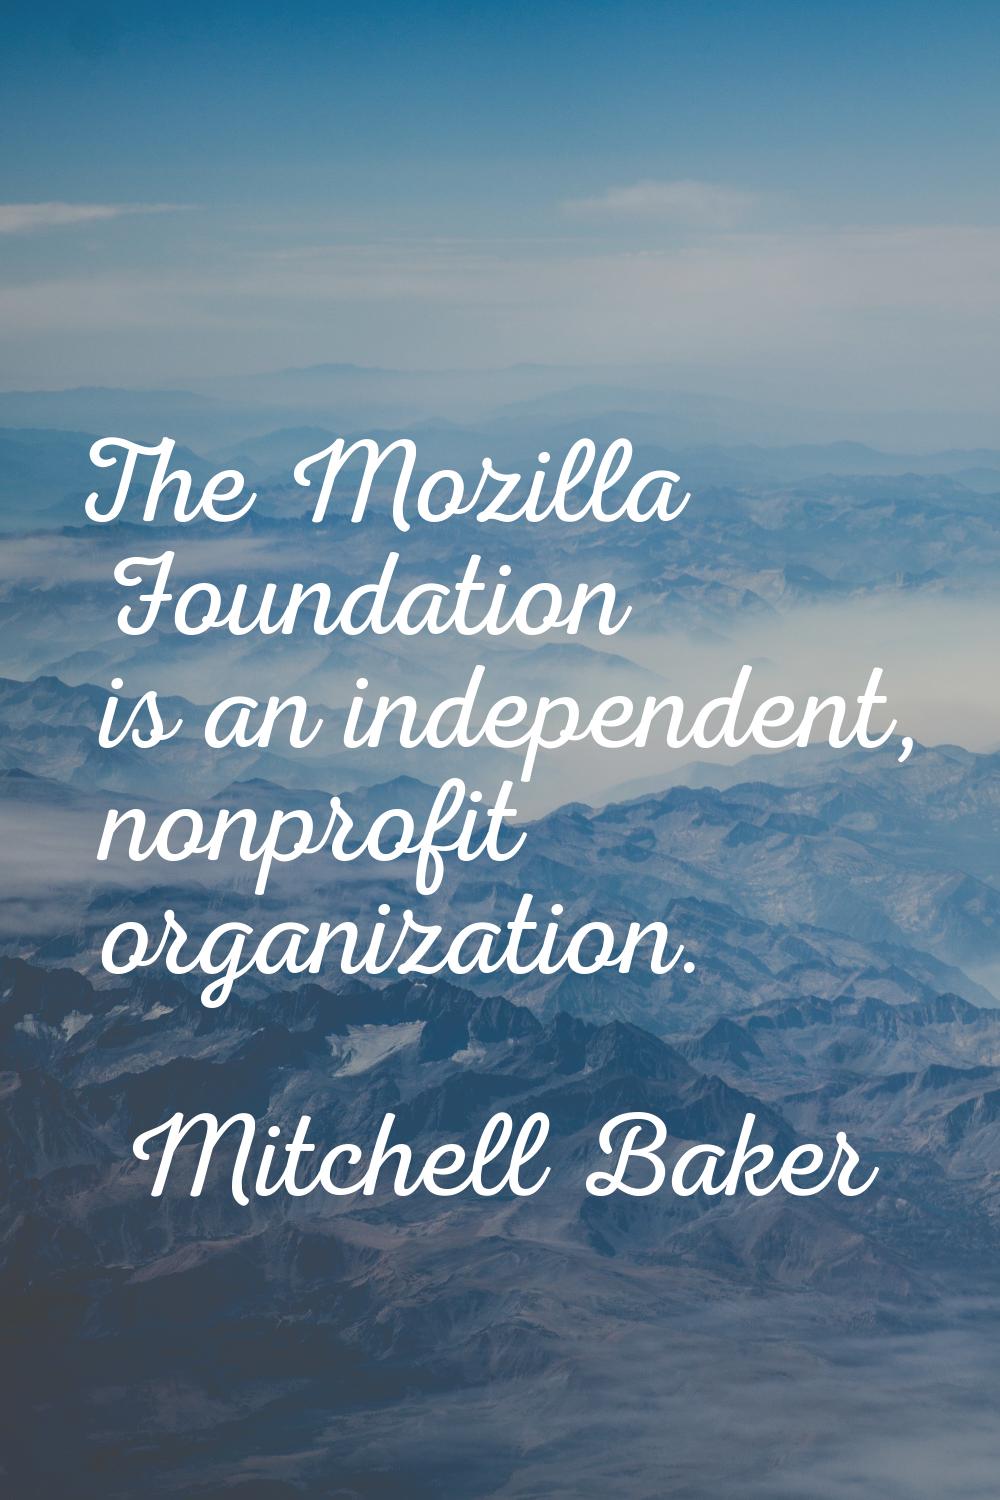 The Mozilla Foundation is an independent, nonprofit organization.